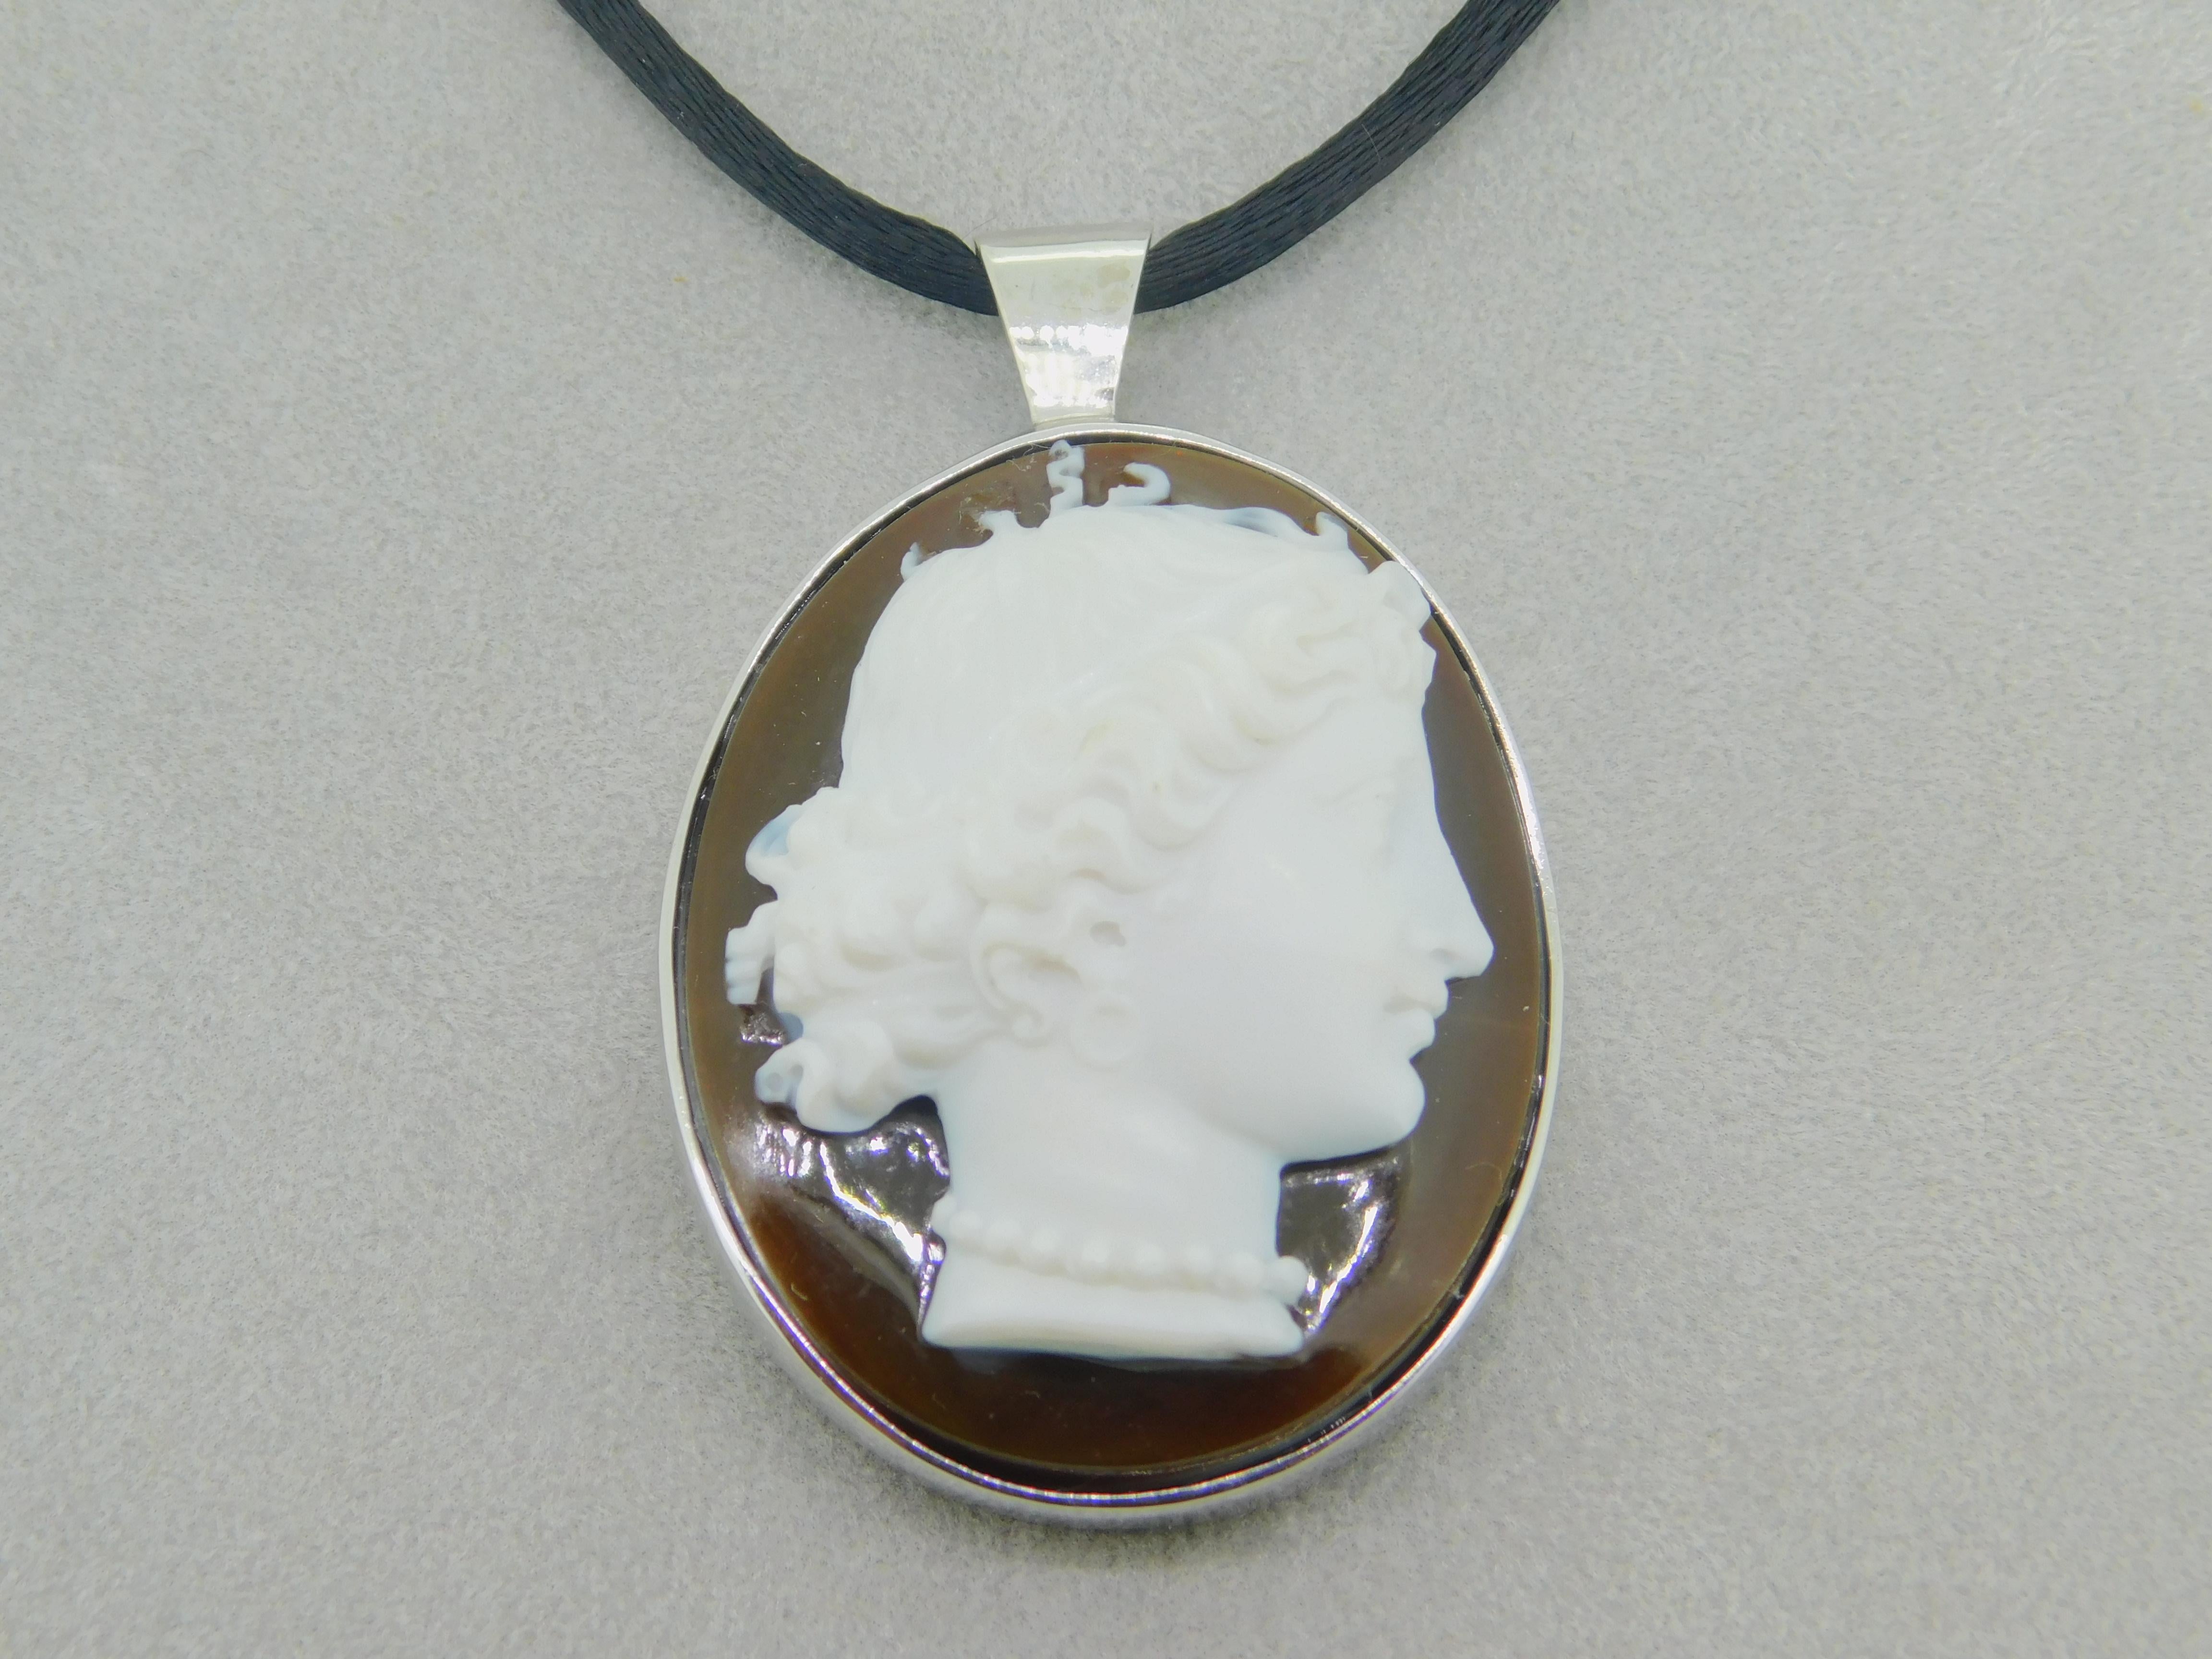 14k Gold Large Genuine Natural Agate Hard Stone Cameo Pendant (#J4136)

14k white gold pendant featuring a large oval brown and white agate cameo. The cameo measures 40.1mm x 32.5mm. The Victorian cameo dates from the 1880's with a new 14k custom